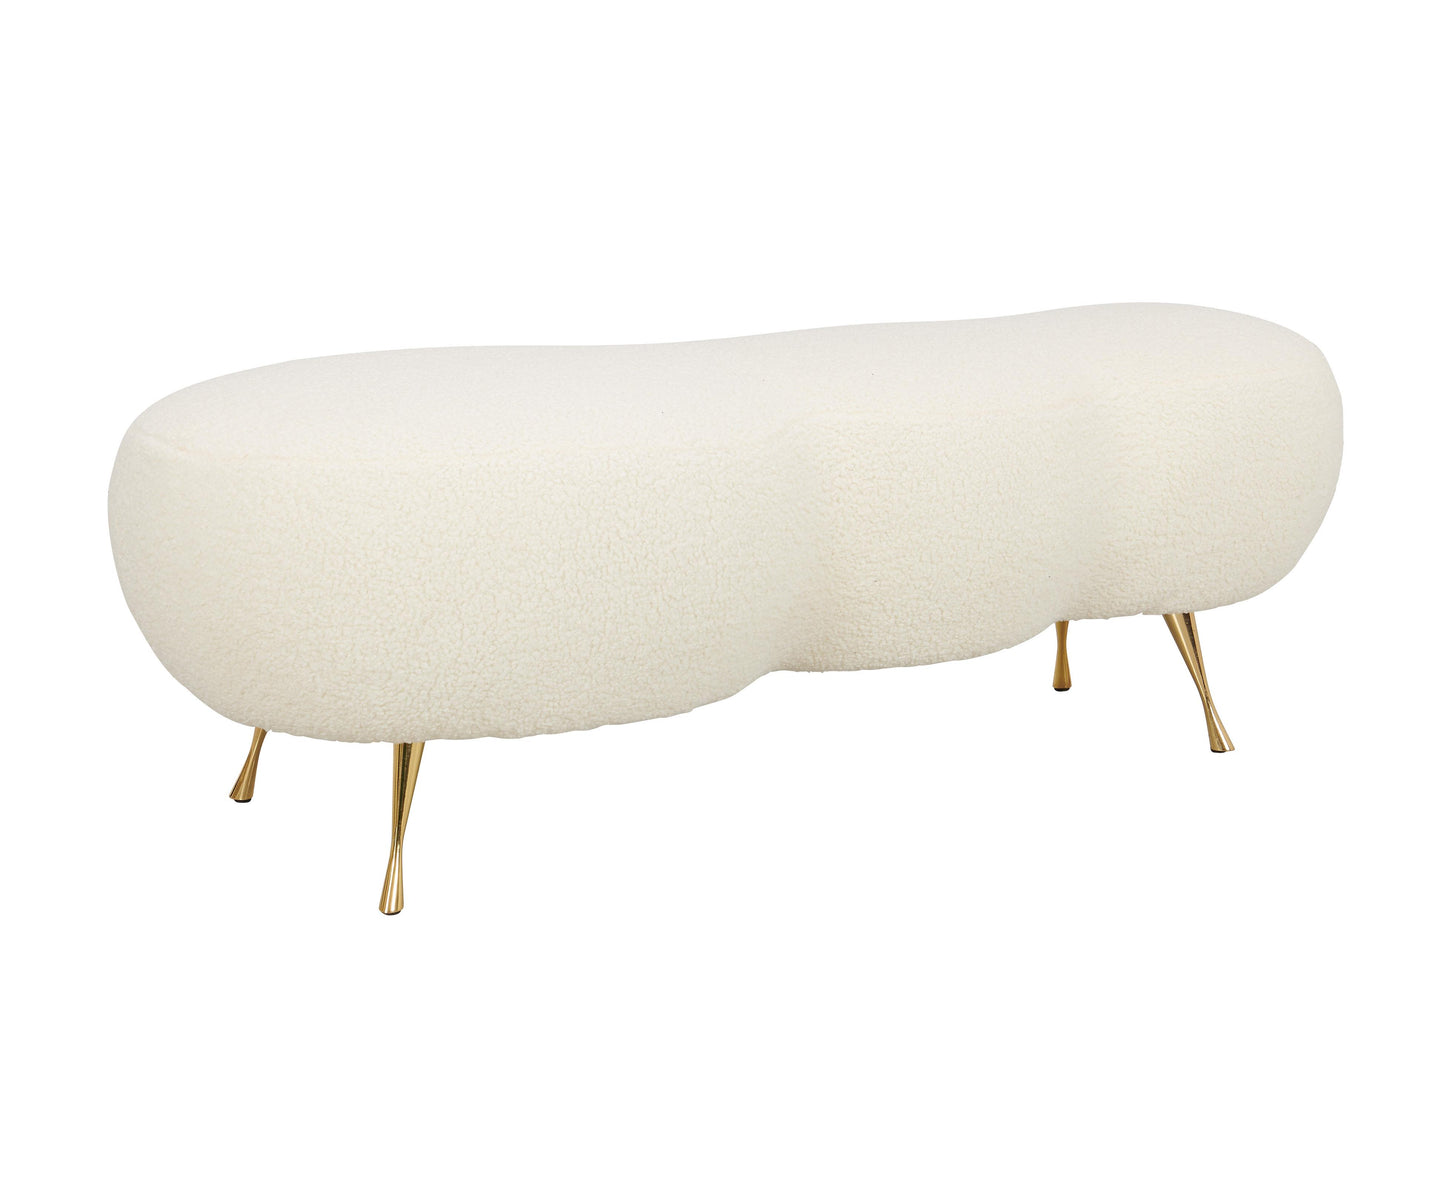 Tov Furniture Welsh Faux Shearling Bench